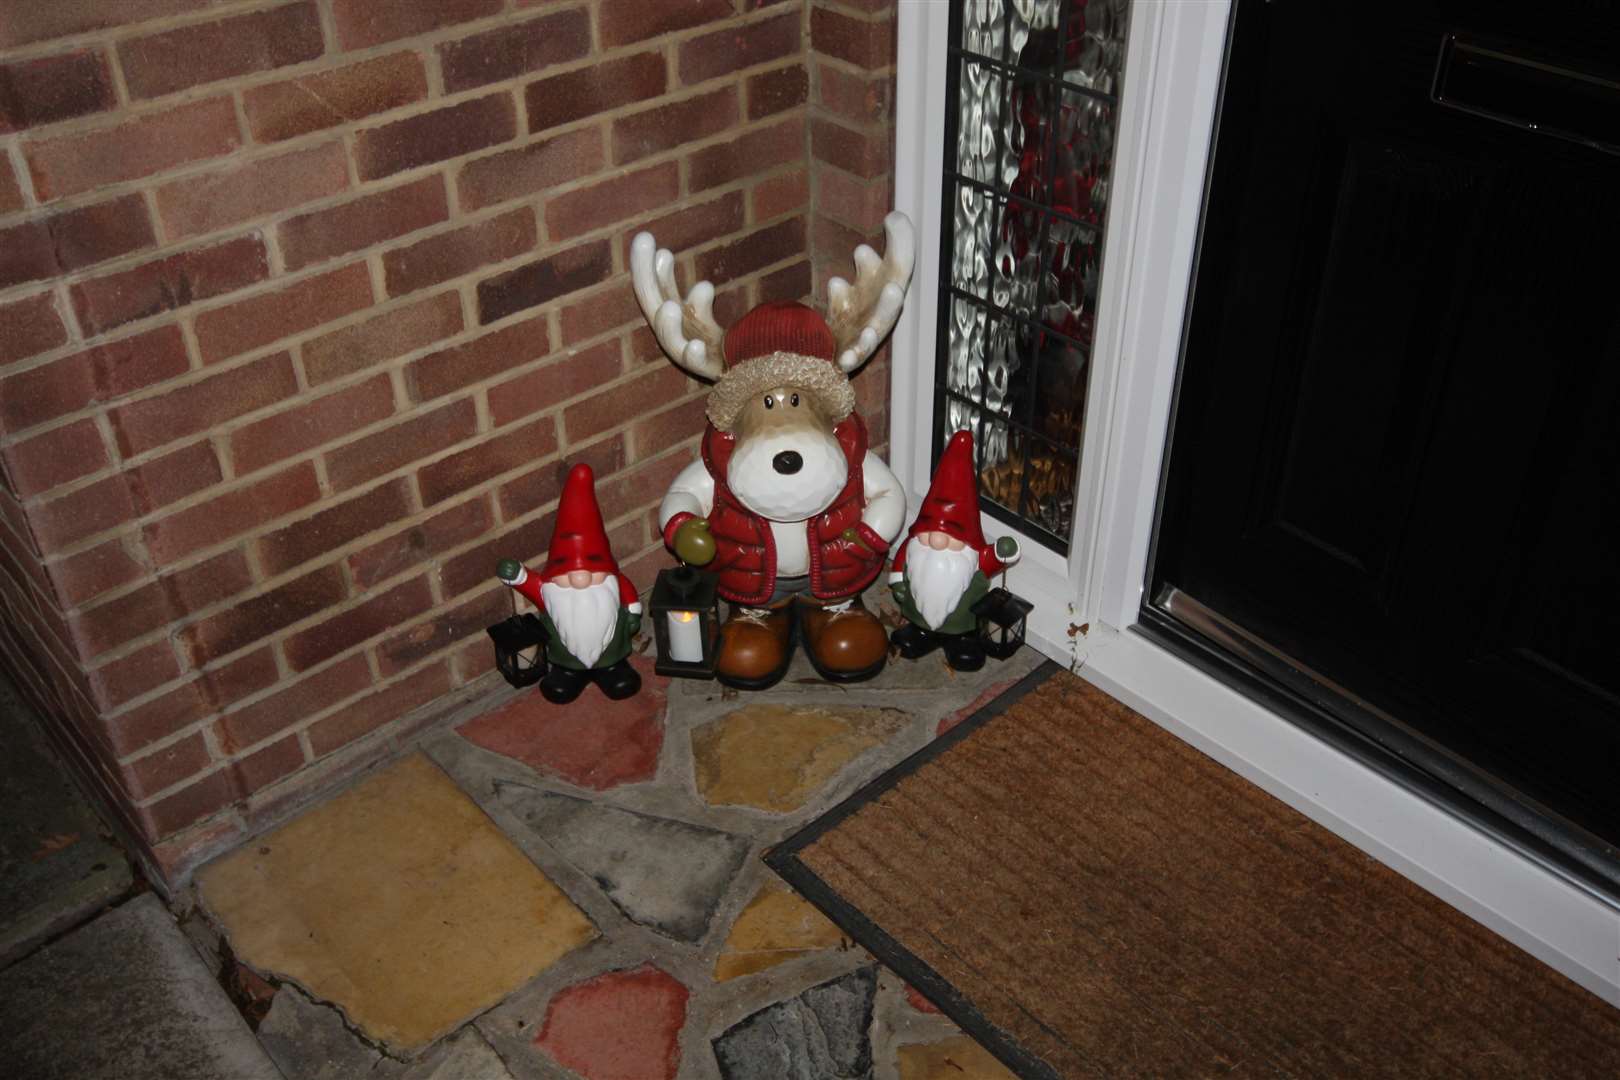 The Nordic gnomes by the front door were taken